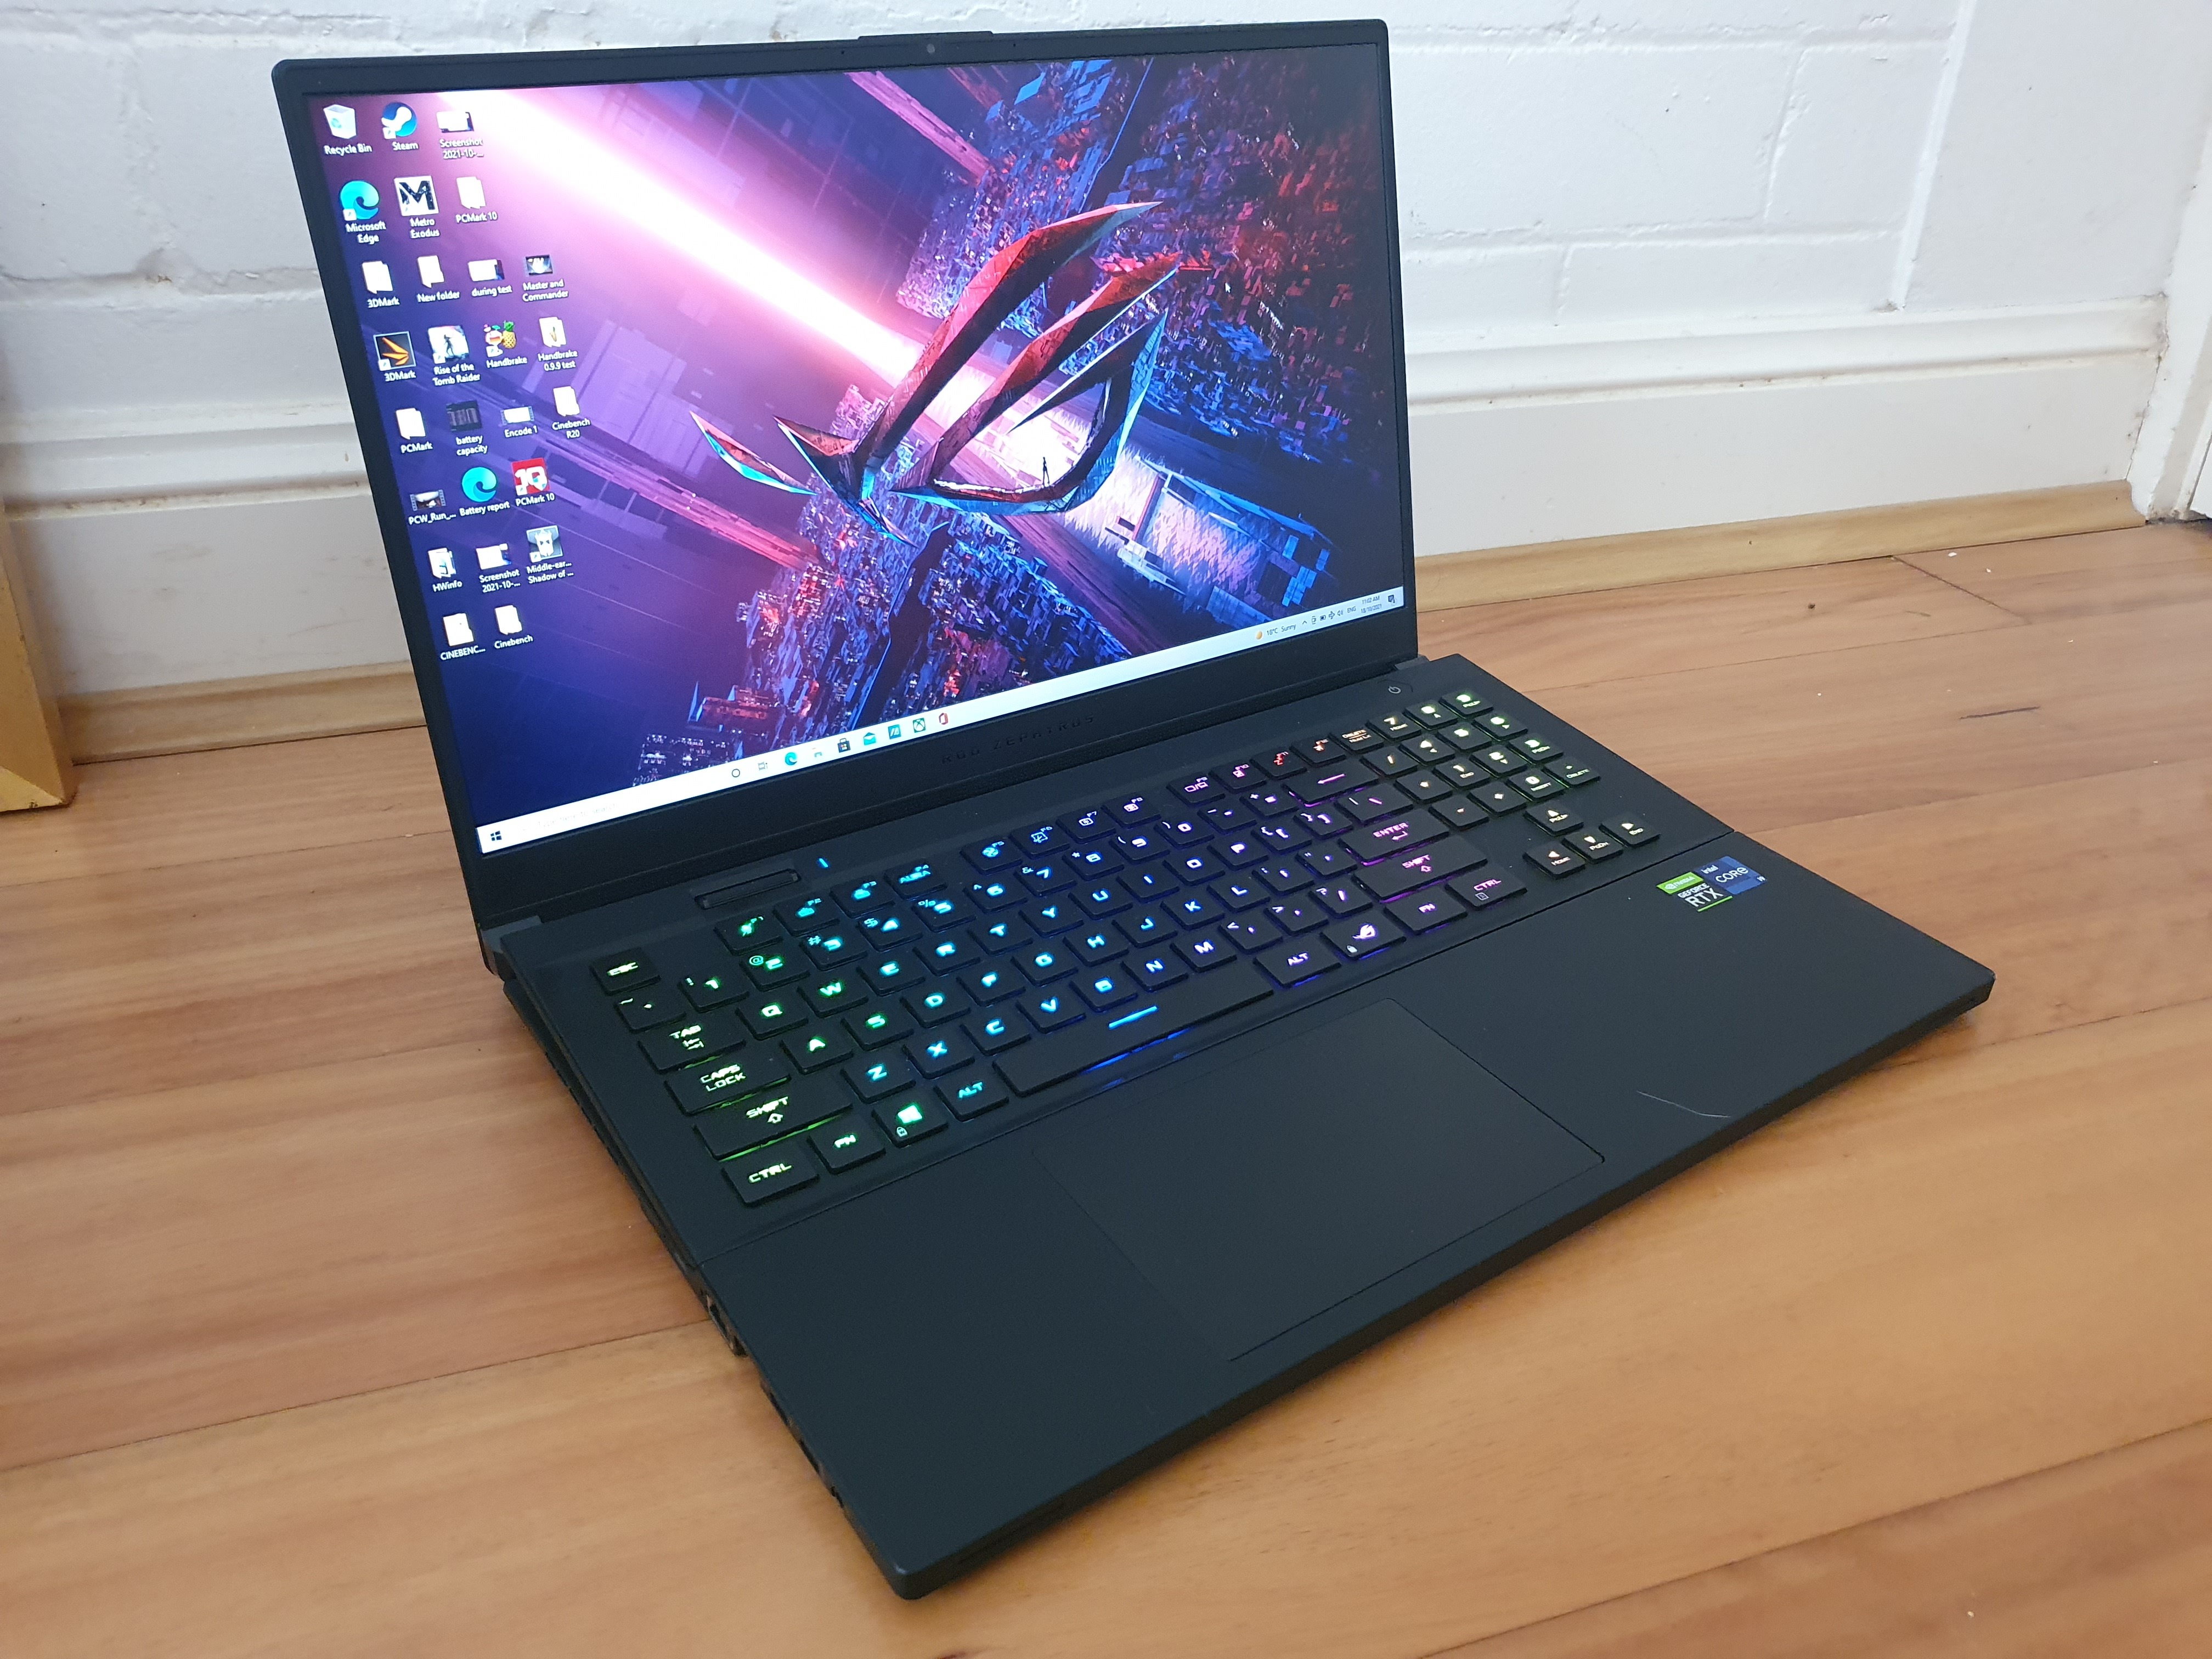 Asus ROG Zephyrus S17 - Another gaming laptop that's great for content creation